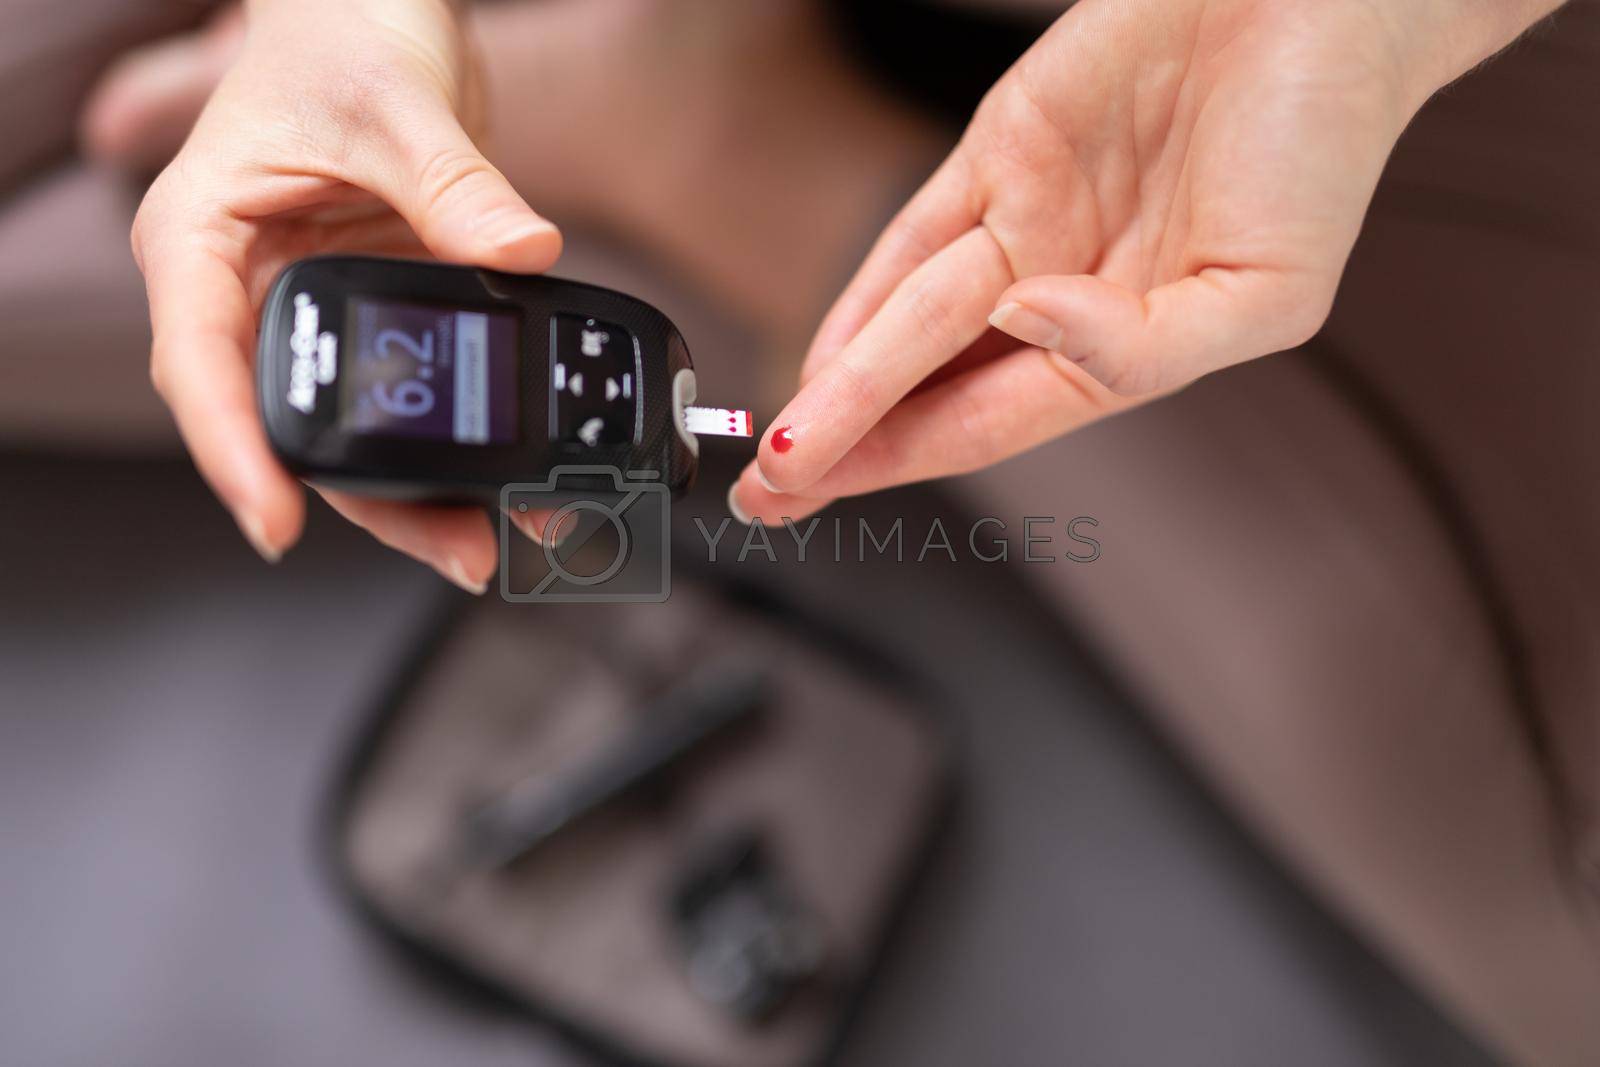 Royalty free image of Blood sugar testing at home. Woman checking blood sugar level by glucometer and test stripe at home. Diabetic checking blood sugar levels. by kasto